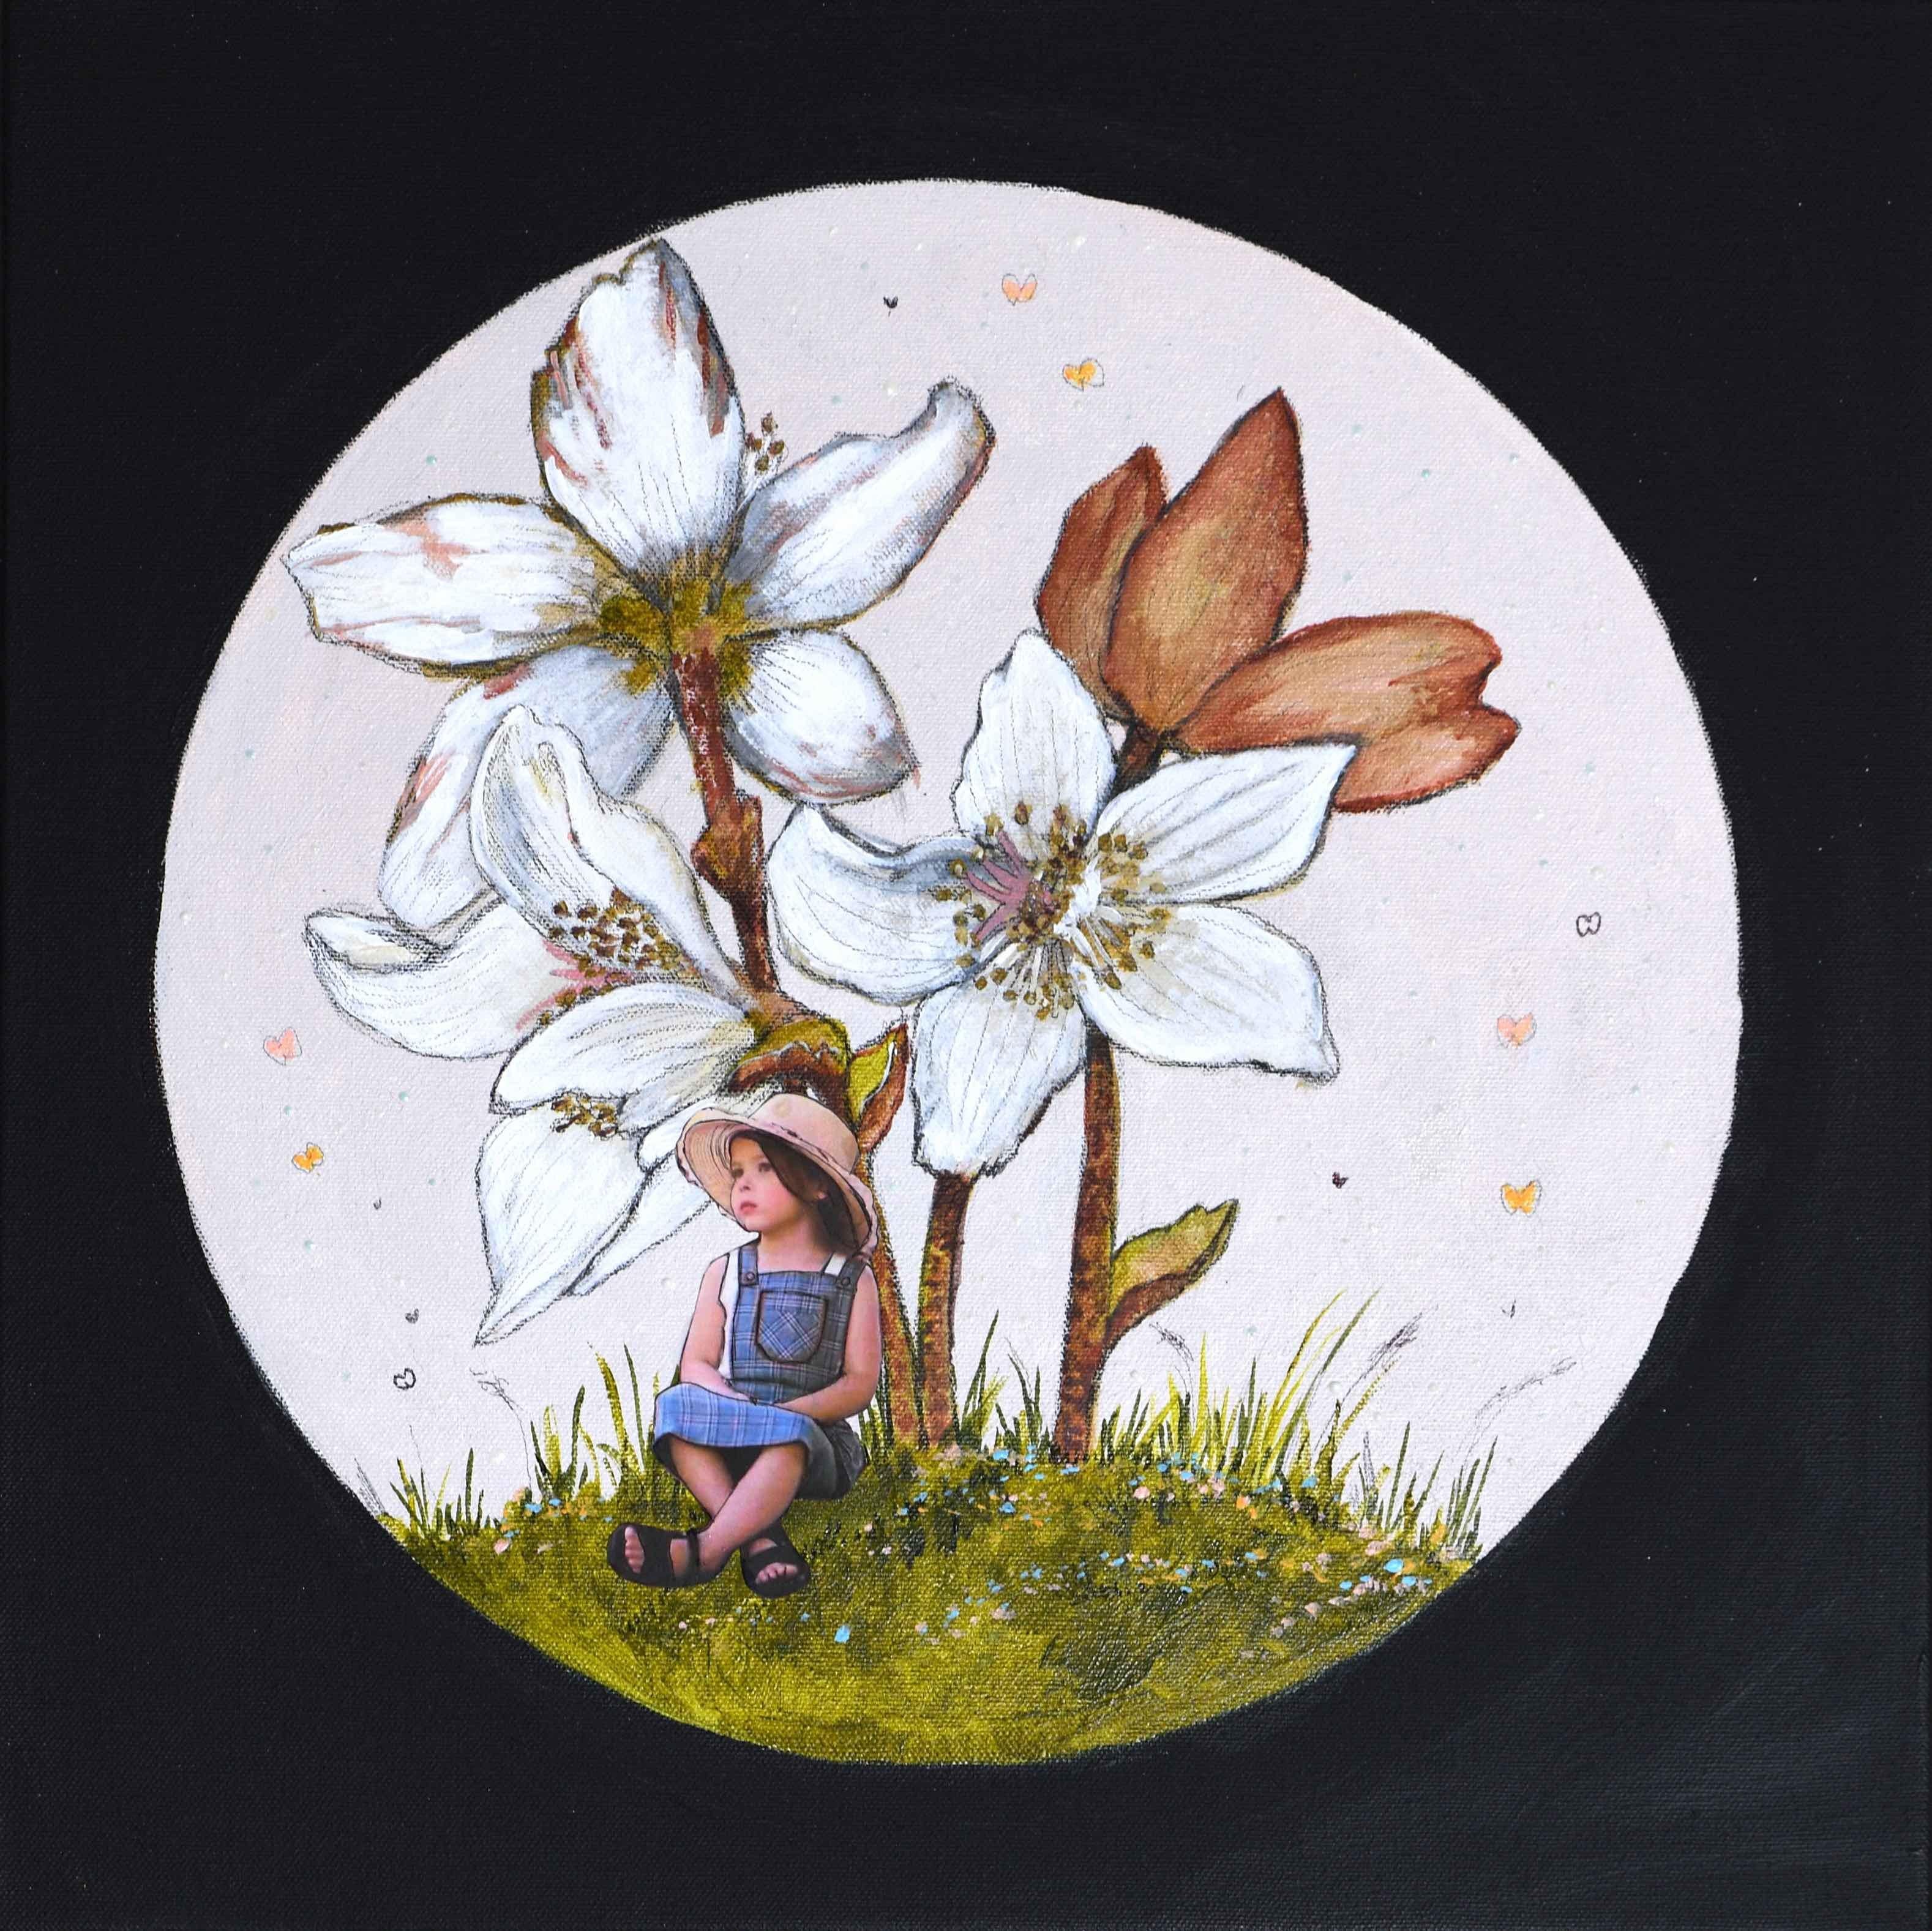 Day Dreaming - Little Girl sitting under White Flowers, Glow In The Dark - Painting by Veronica Green